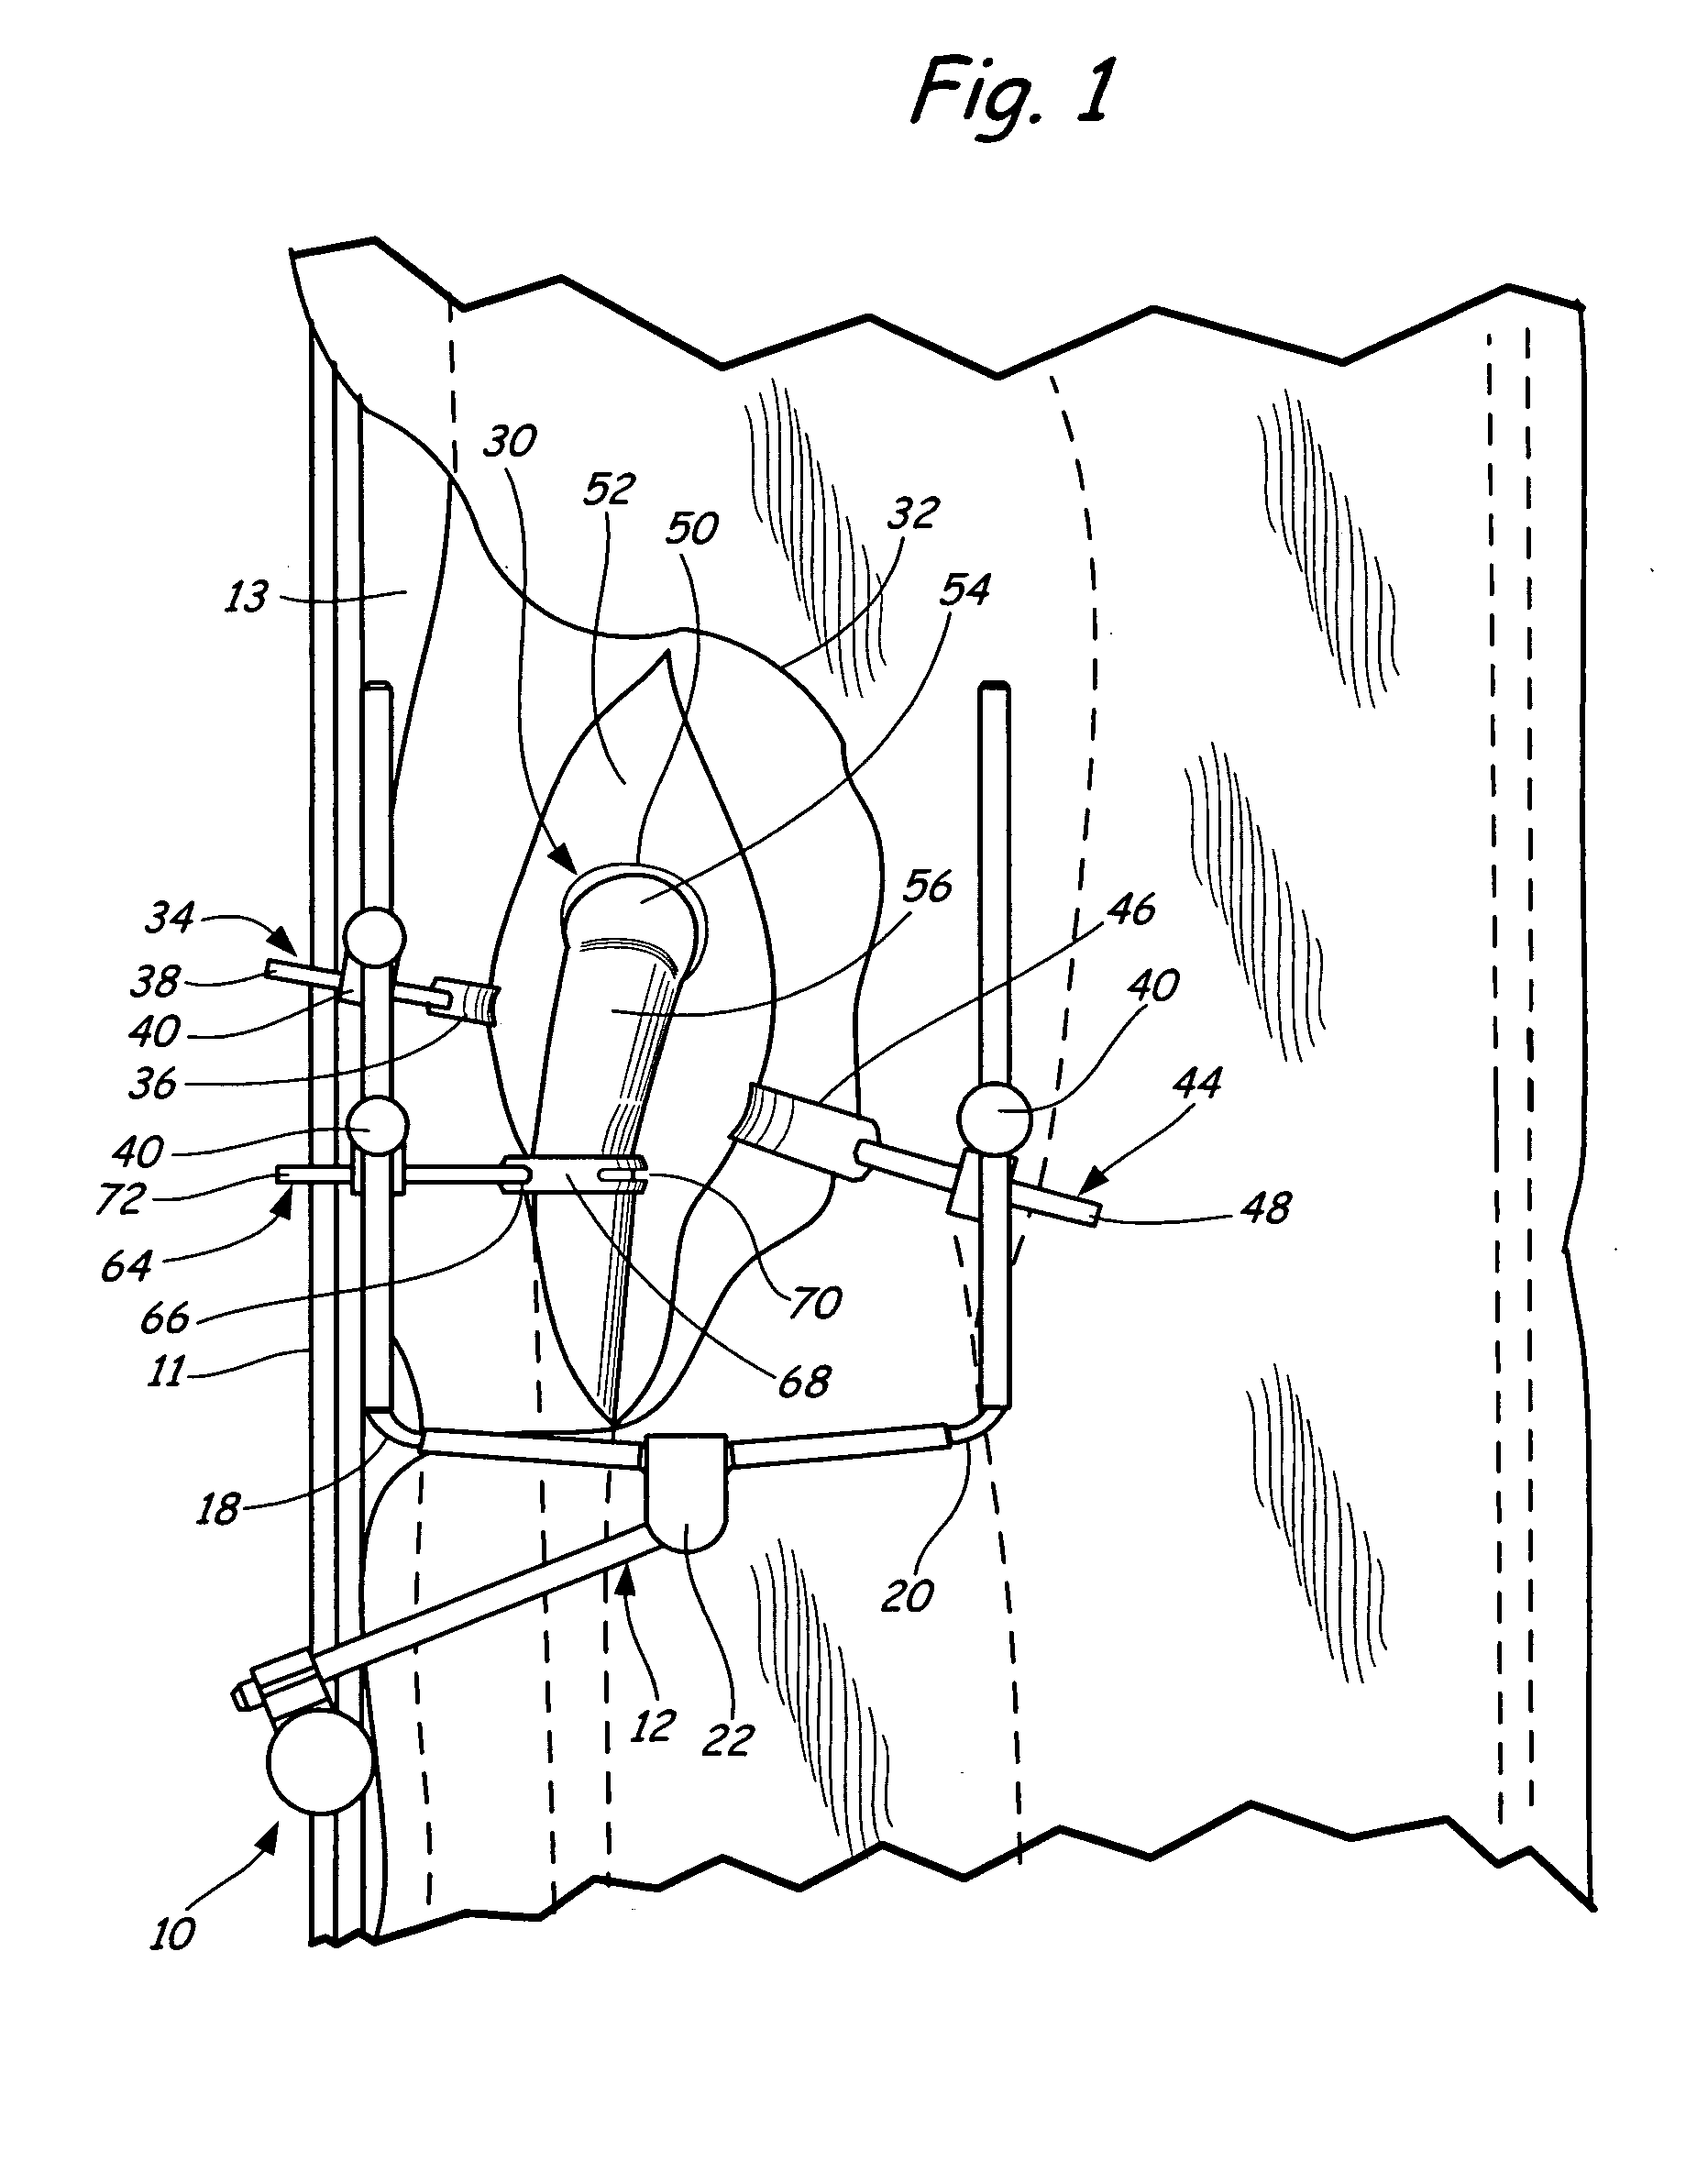 Method of table mounted retraction in hip surgery